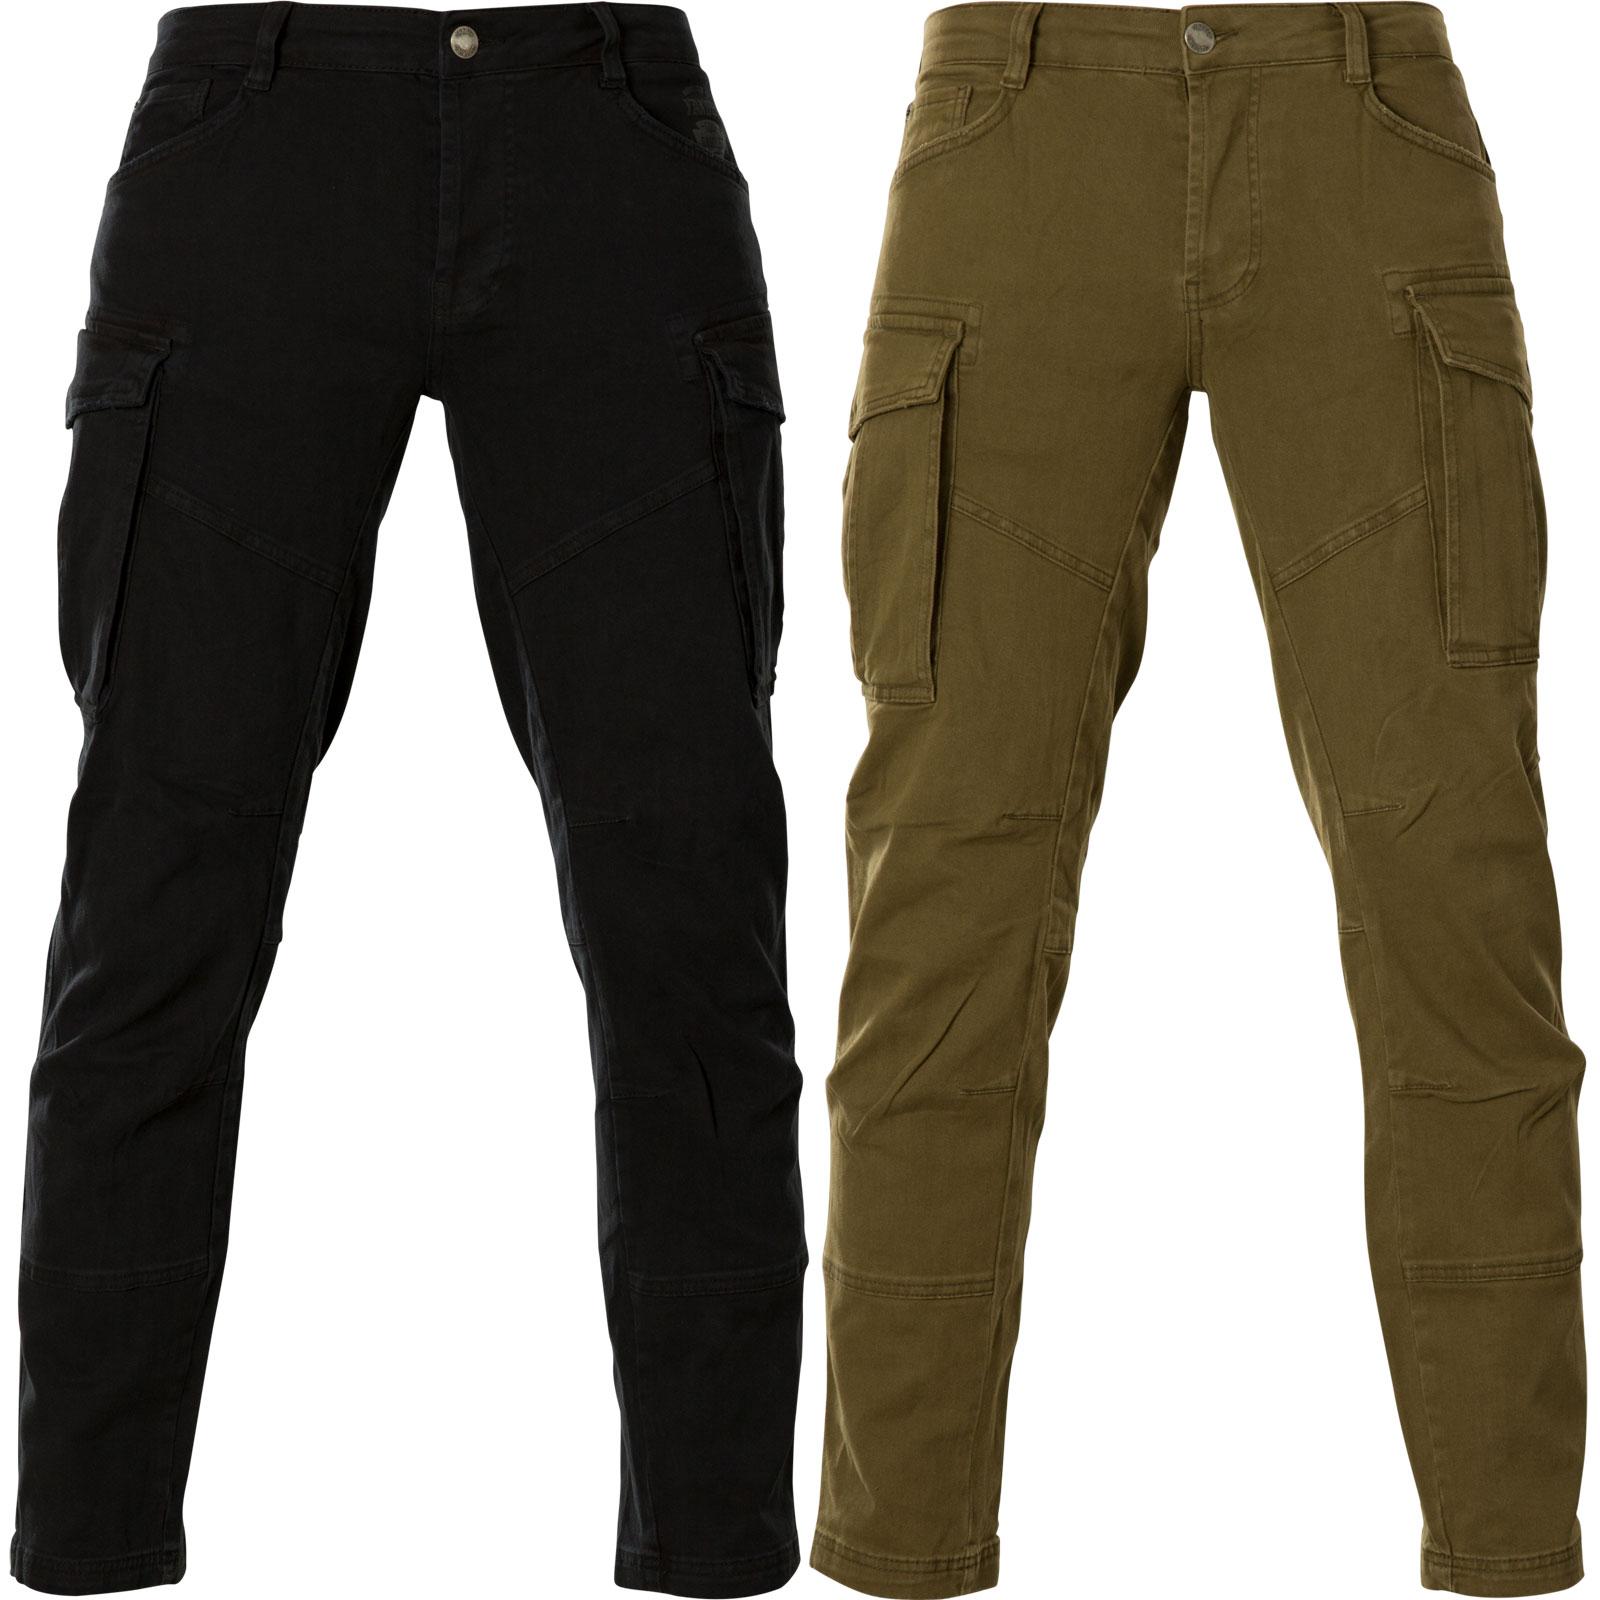 Yakuza Core Cargo Pants CPB-15010 in olive with a small prints